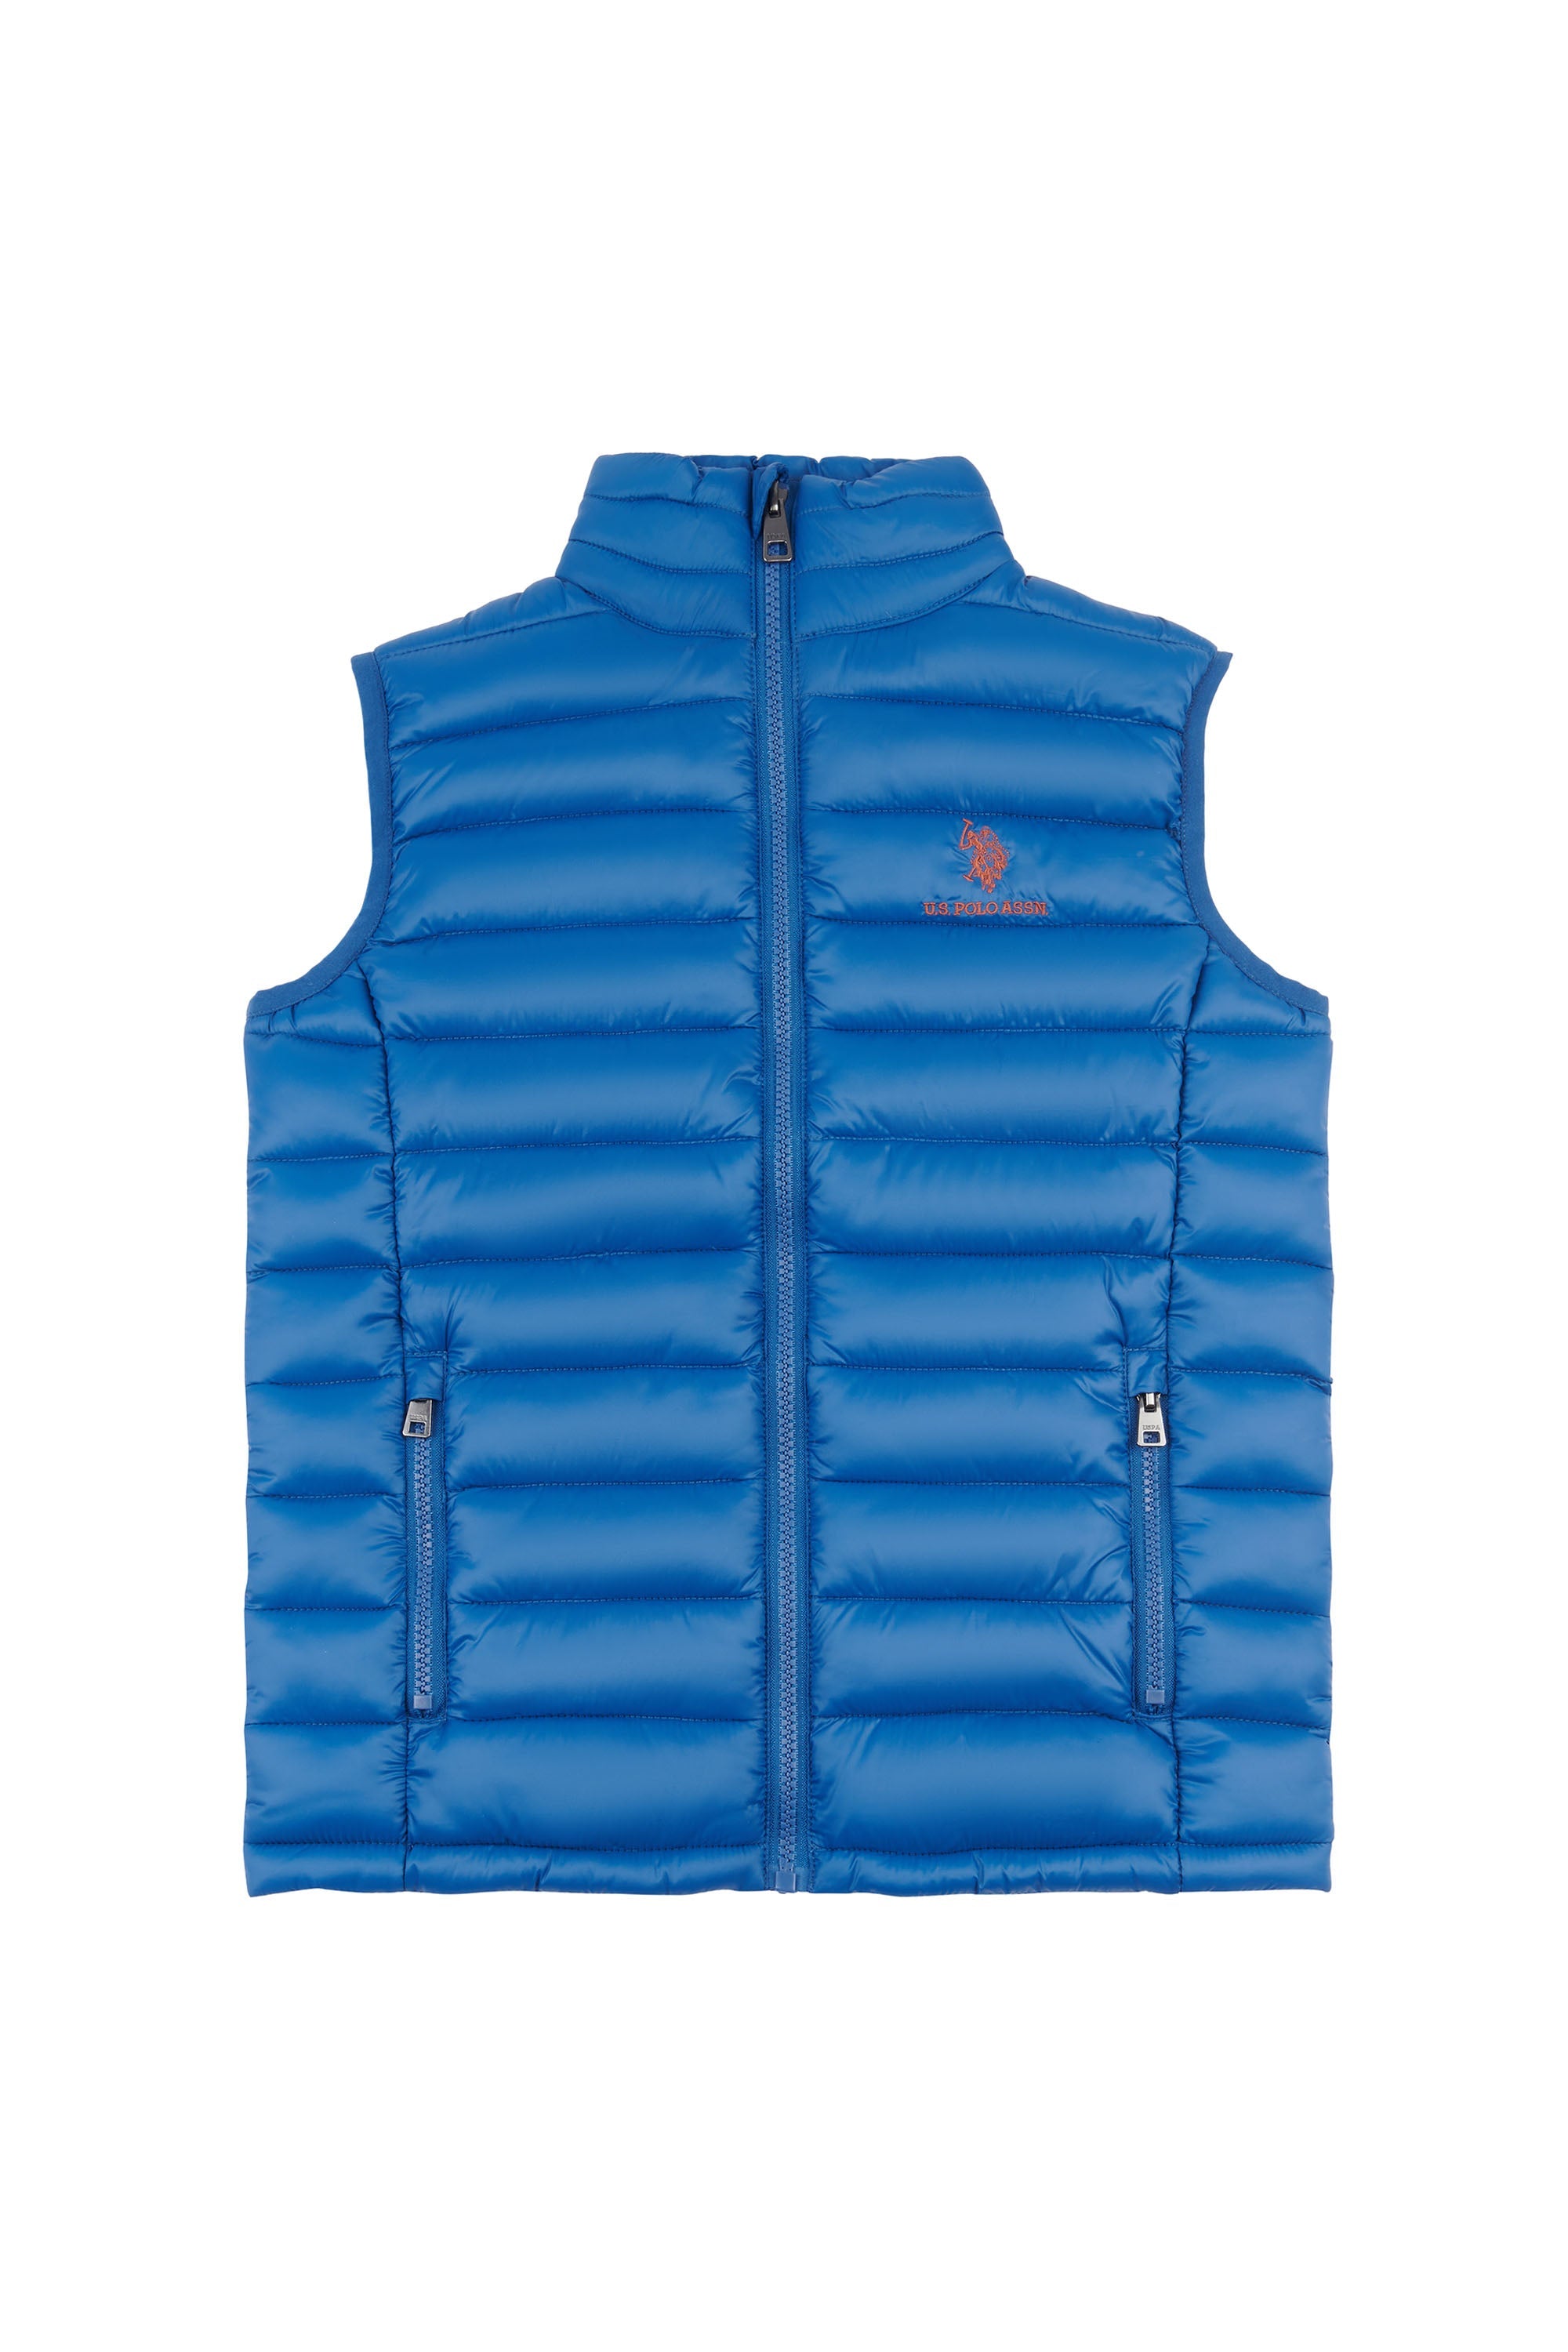 U.S. Polo Assn. Boys Lightweight Quilted Gilet in Set Sail